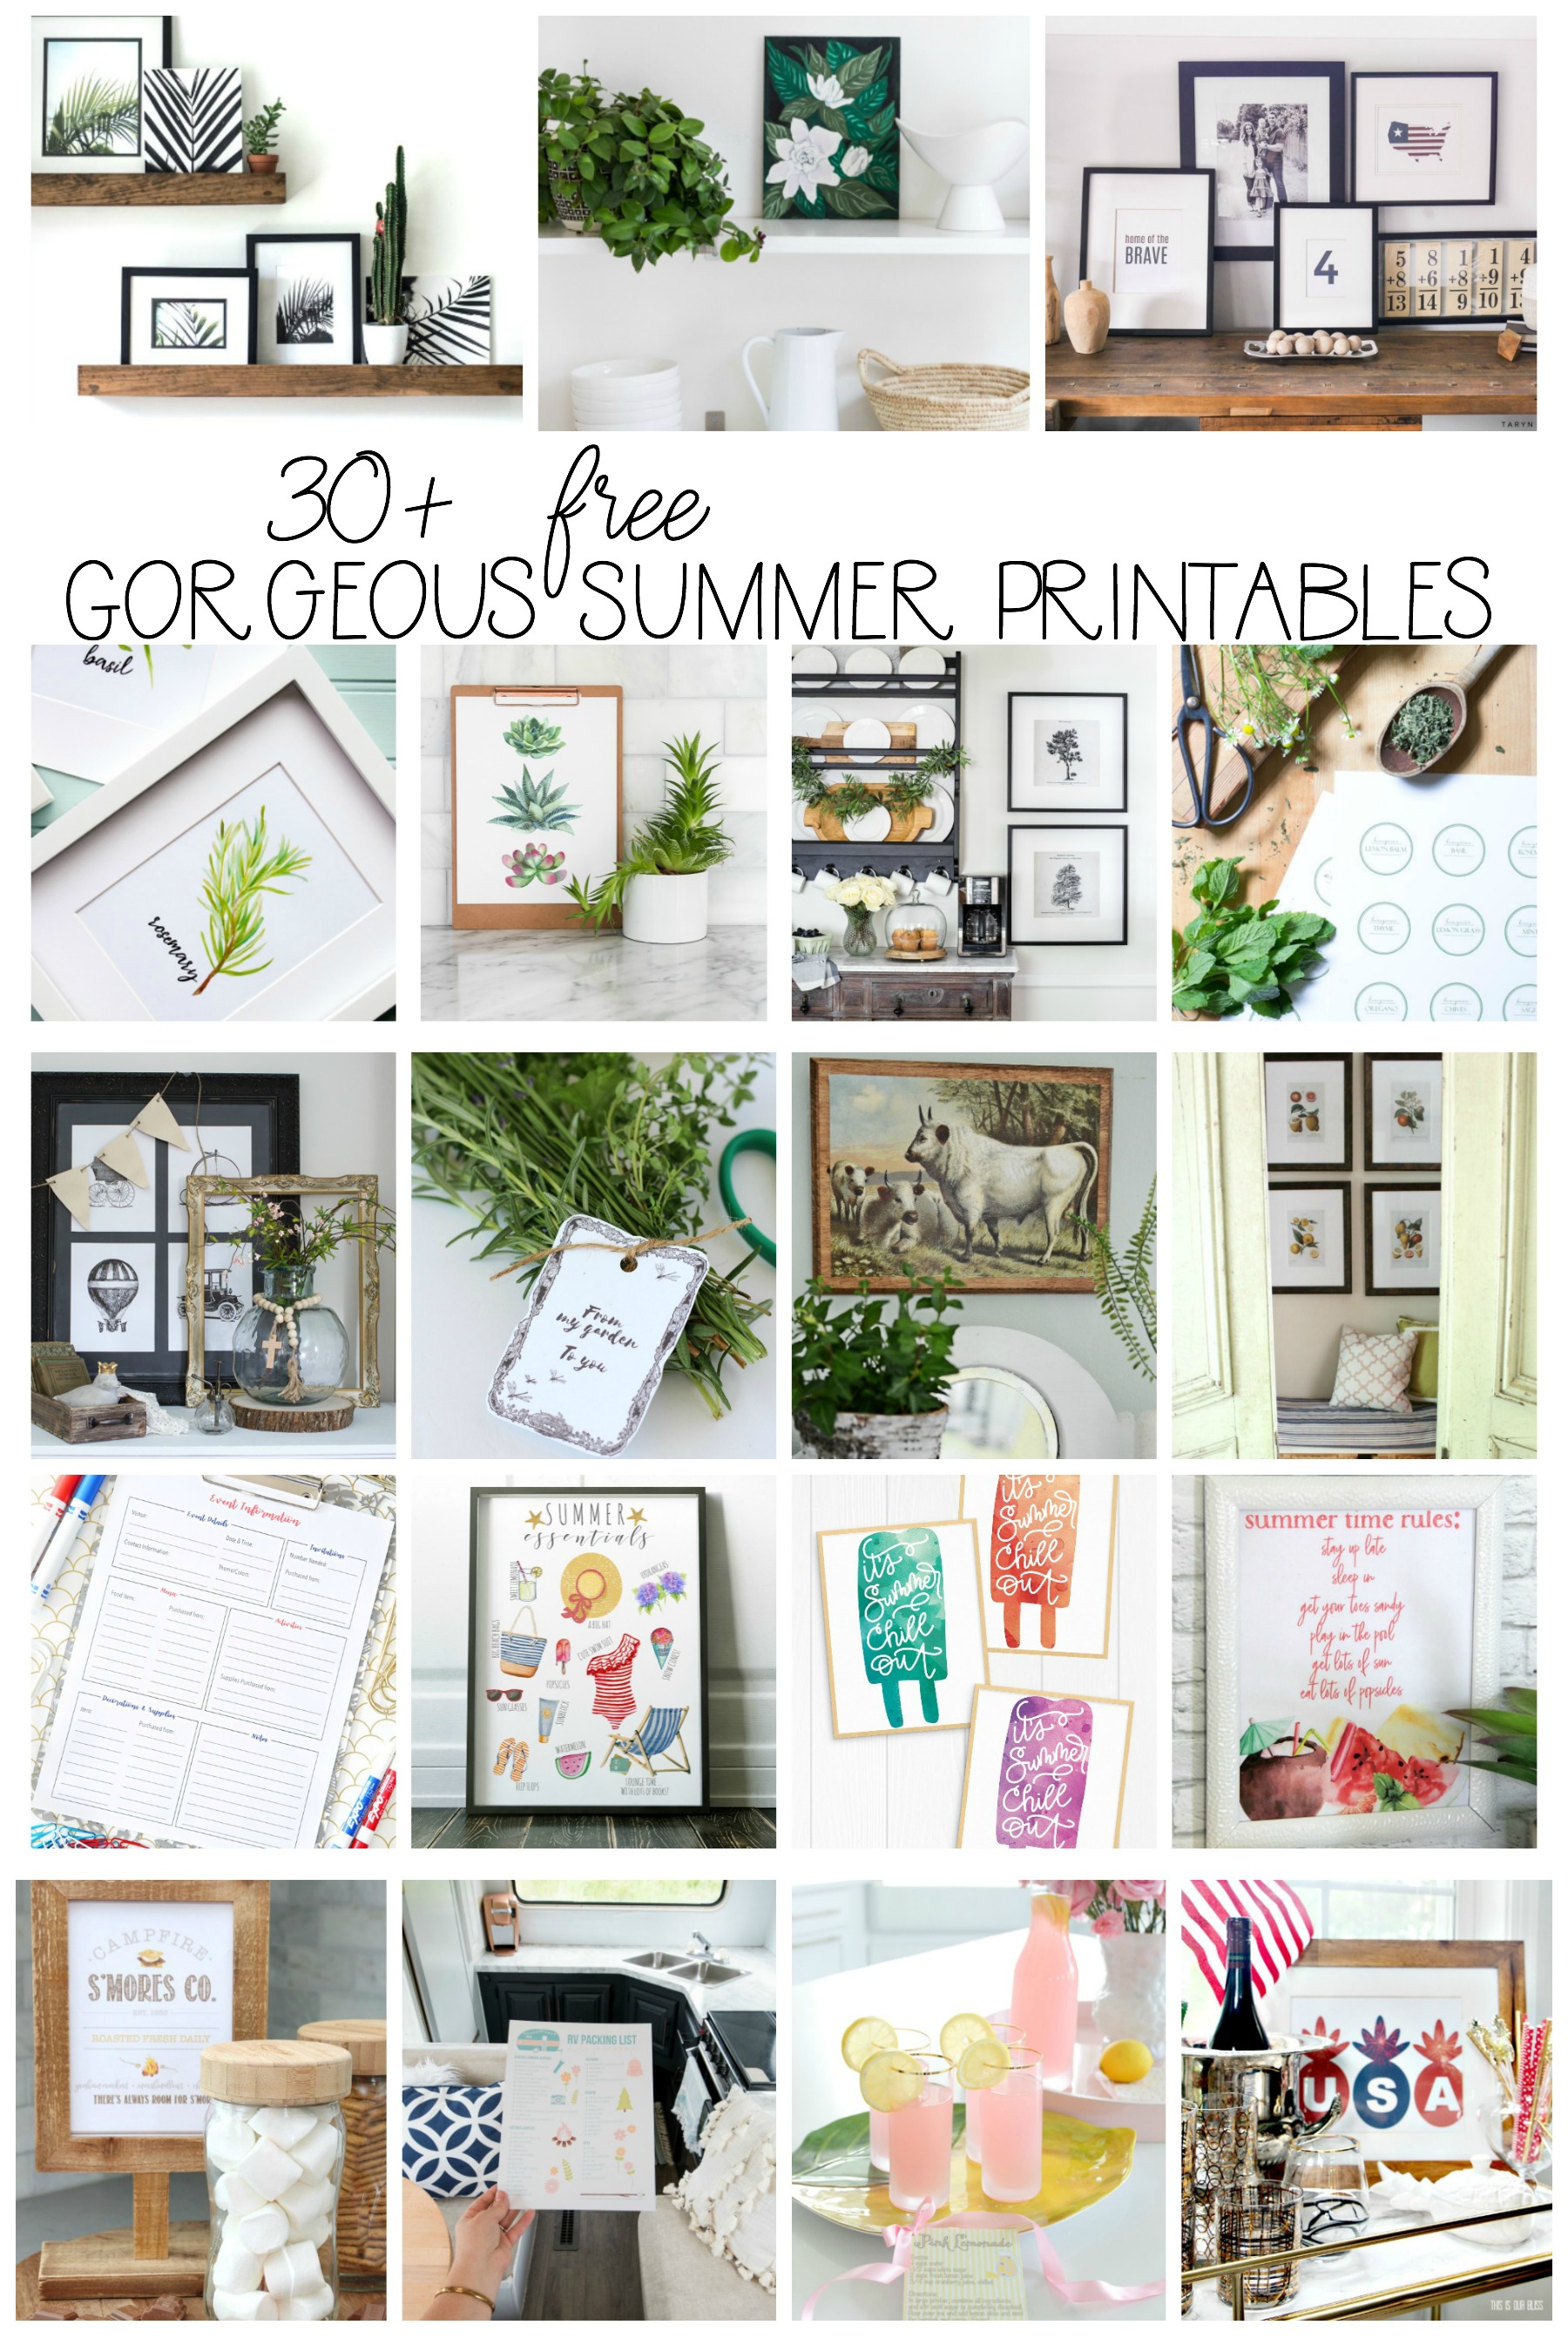 30 + free gorgeous summer printables poster.